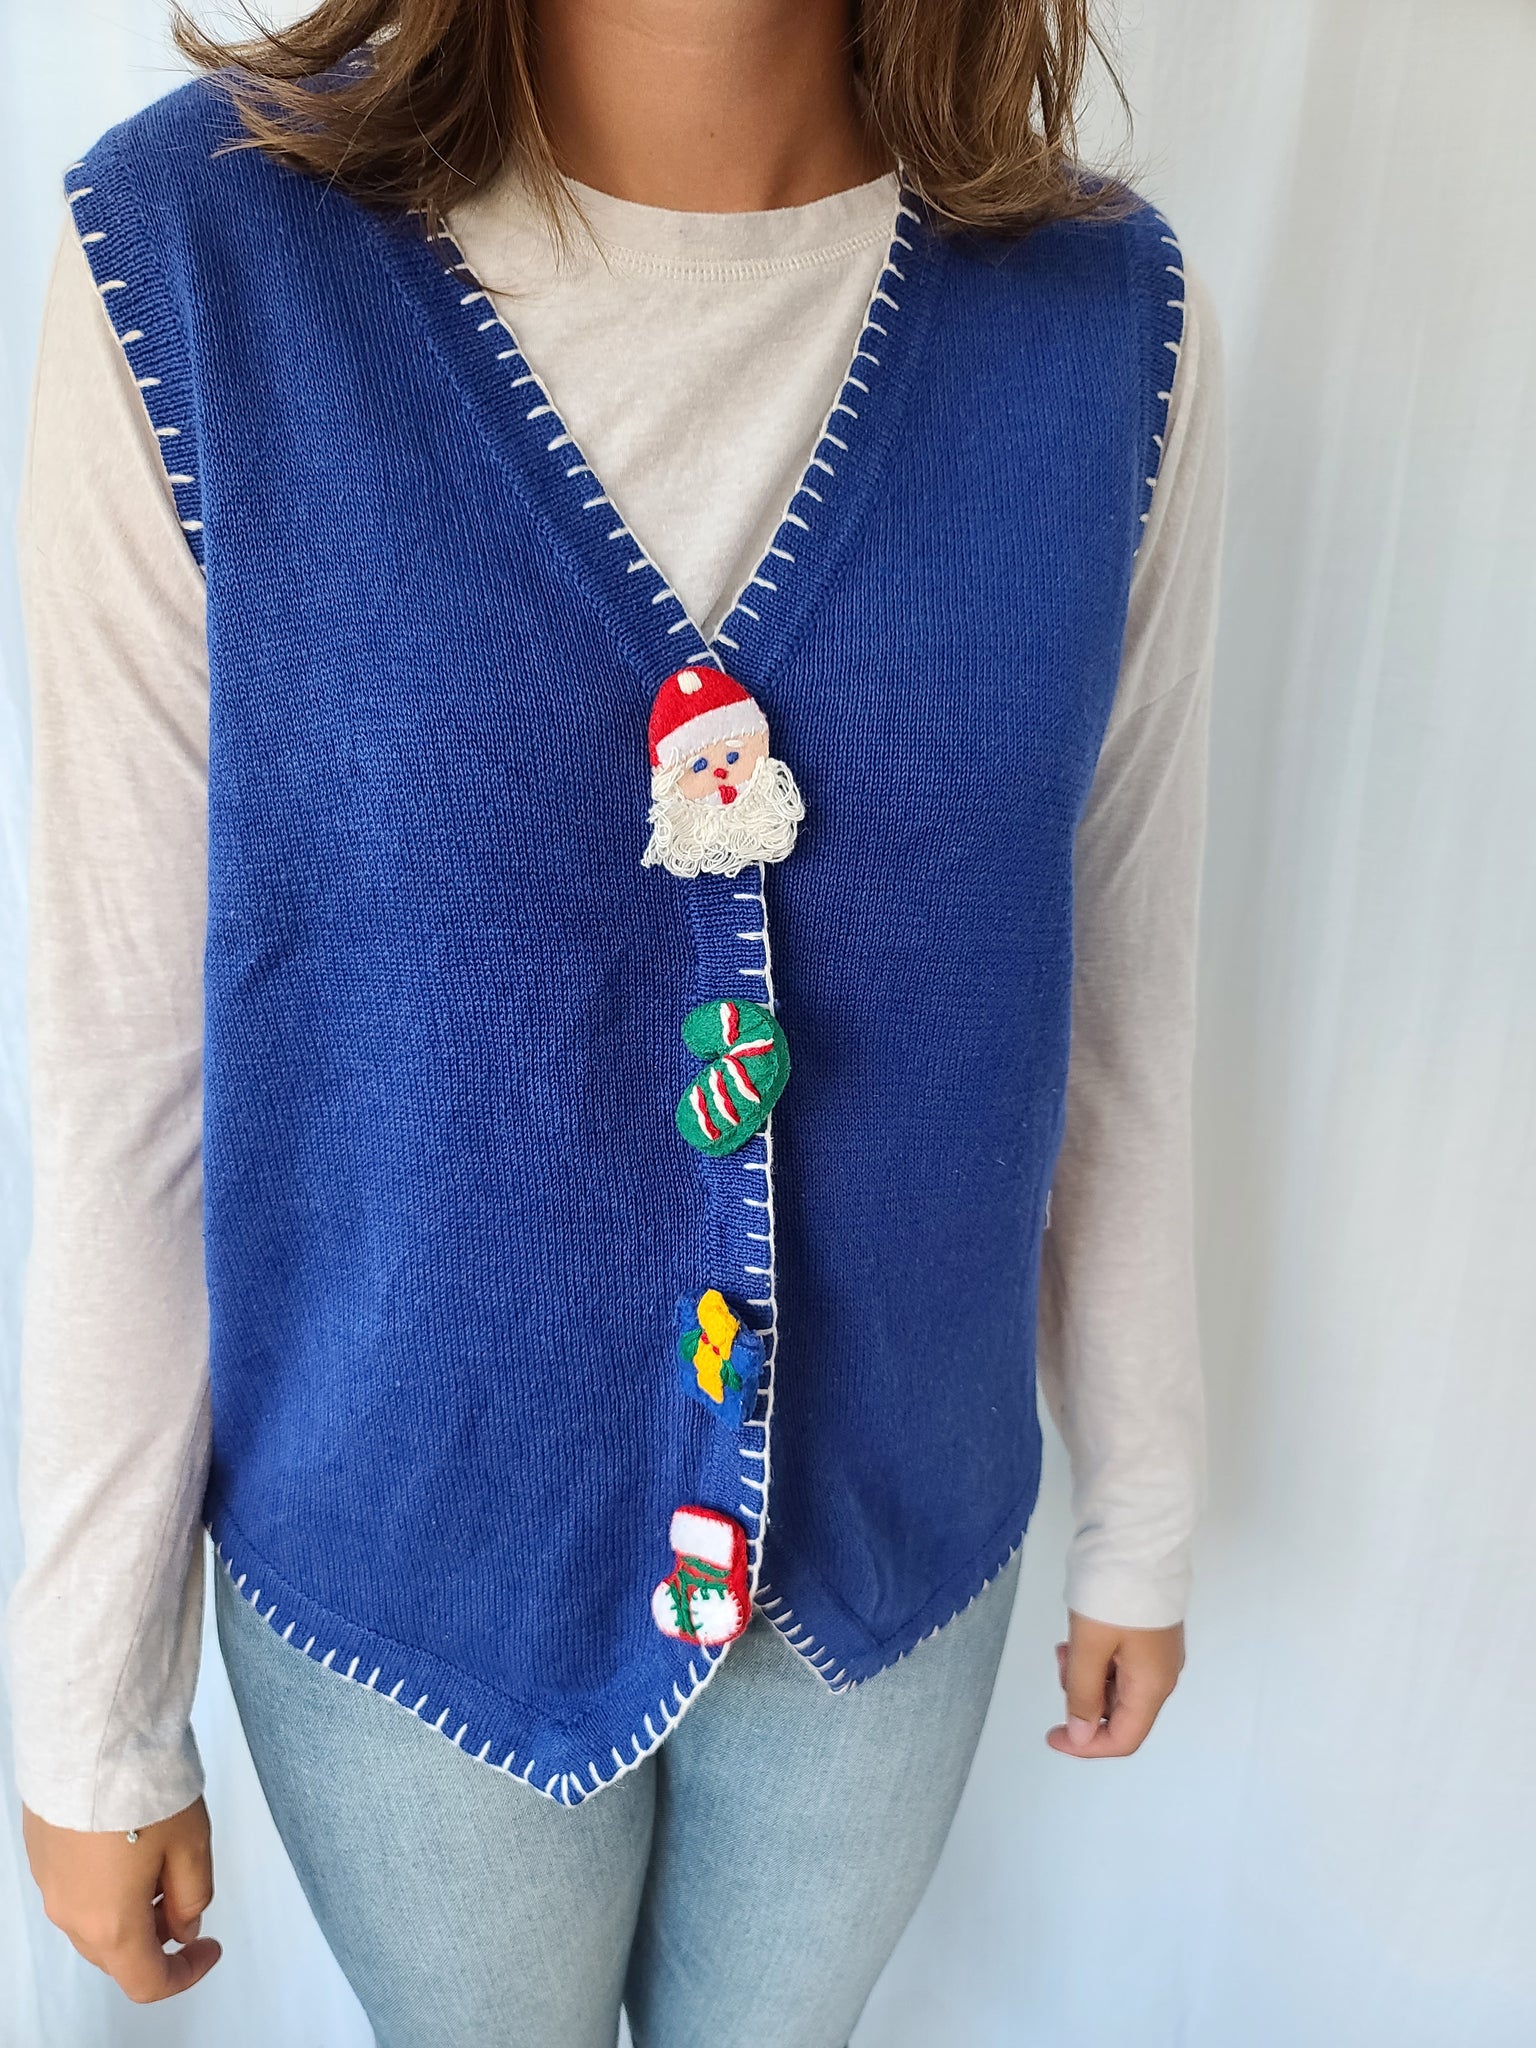 Simple Blue Sweater with Special Buttons Vest